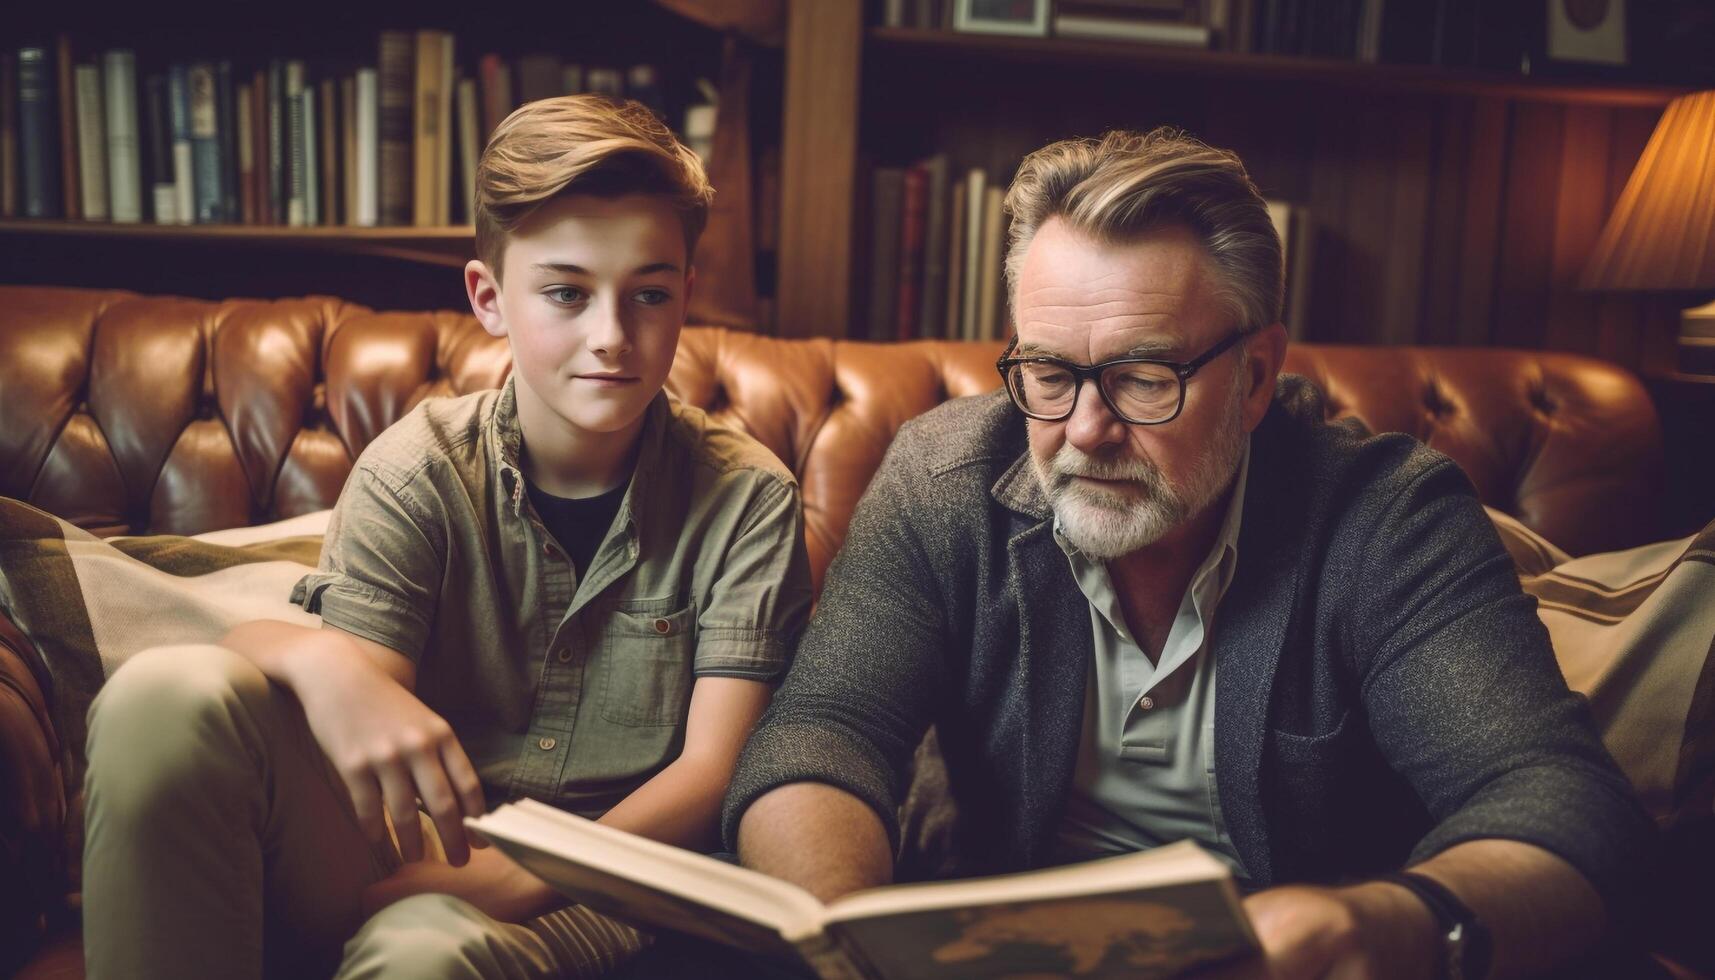 Father and son bond over literature in cozy living room generated by AI photo